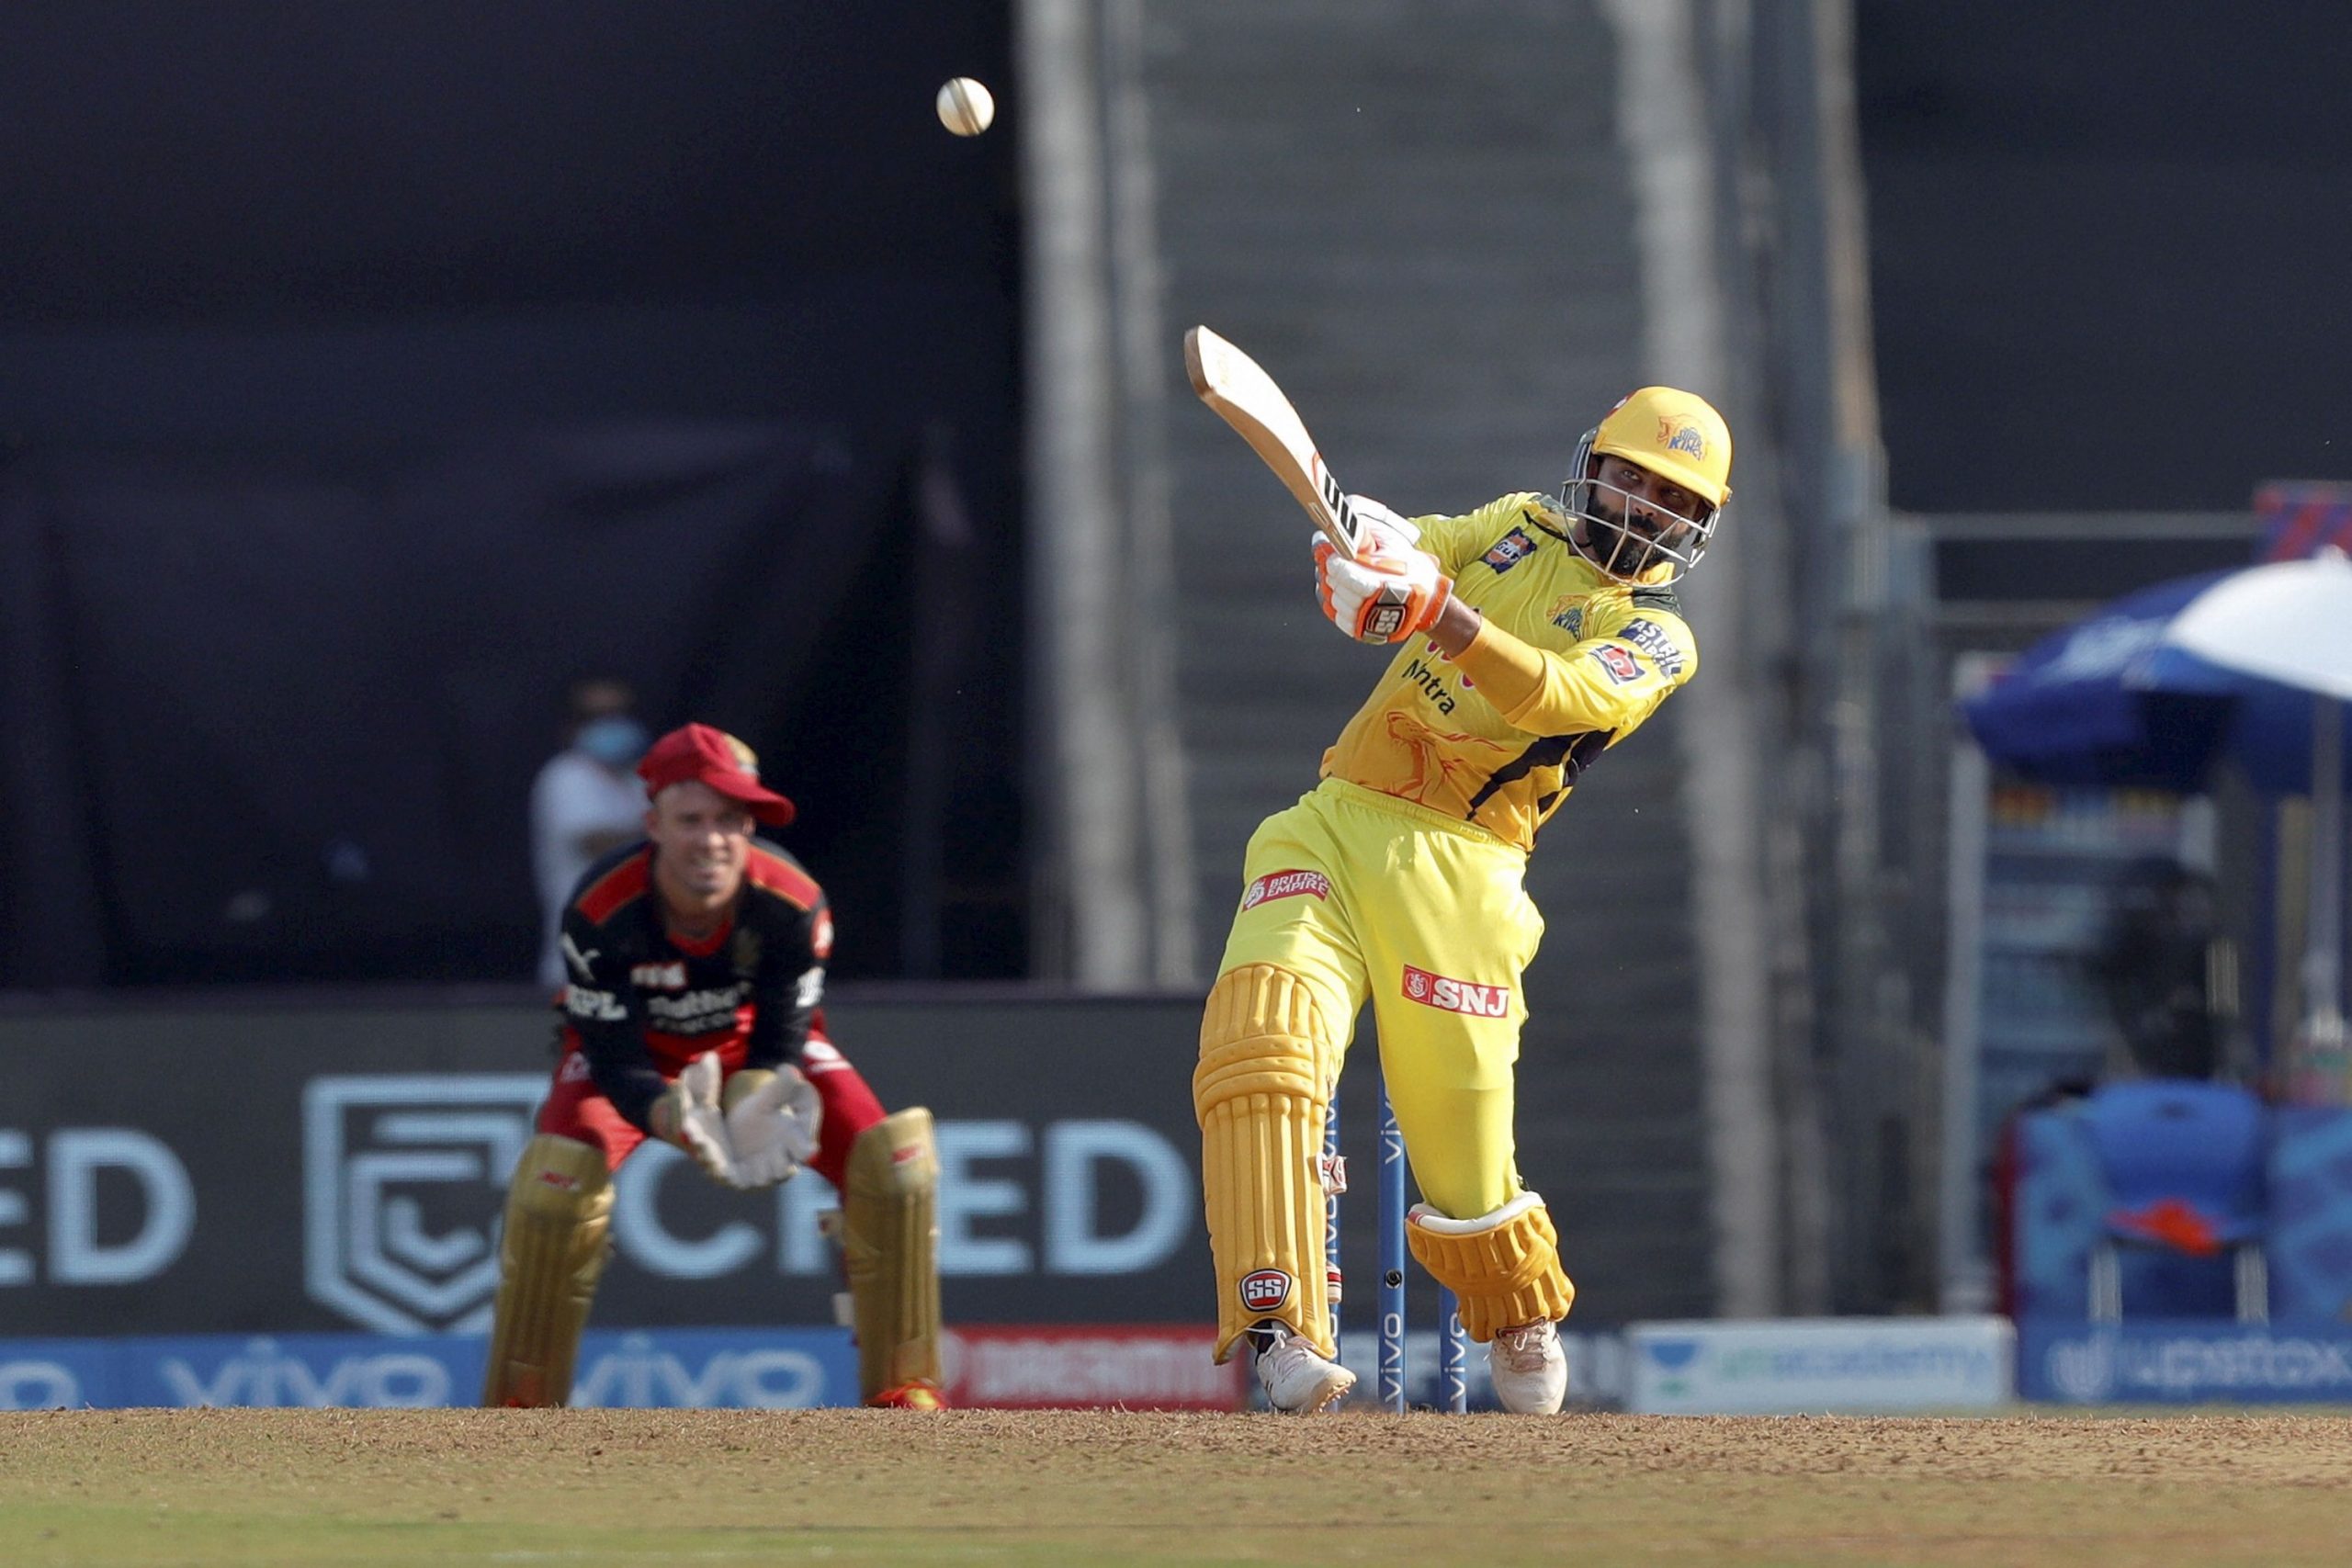 Jadeja vs RCB: CSK all-rounder’s phenomenal performance with the bat and ball